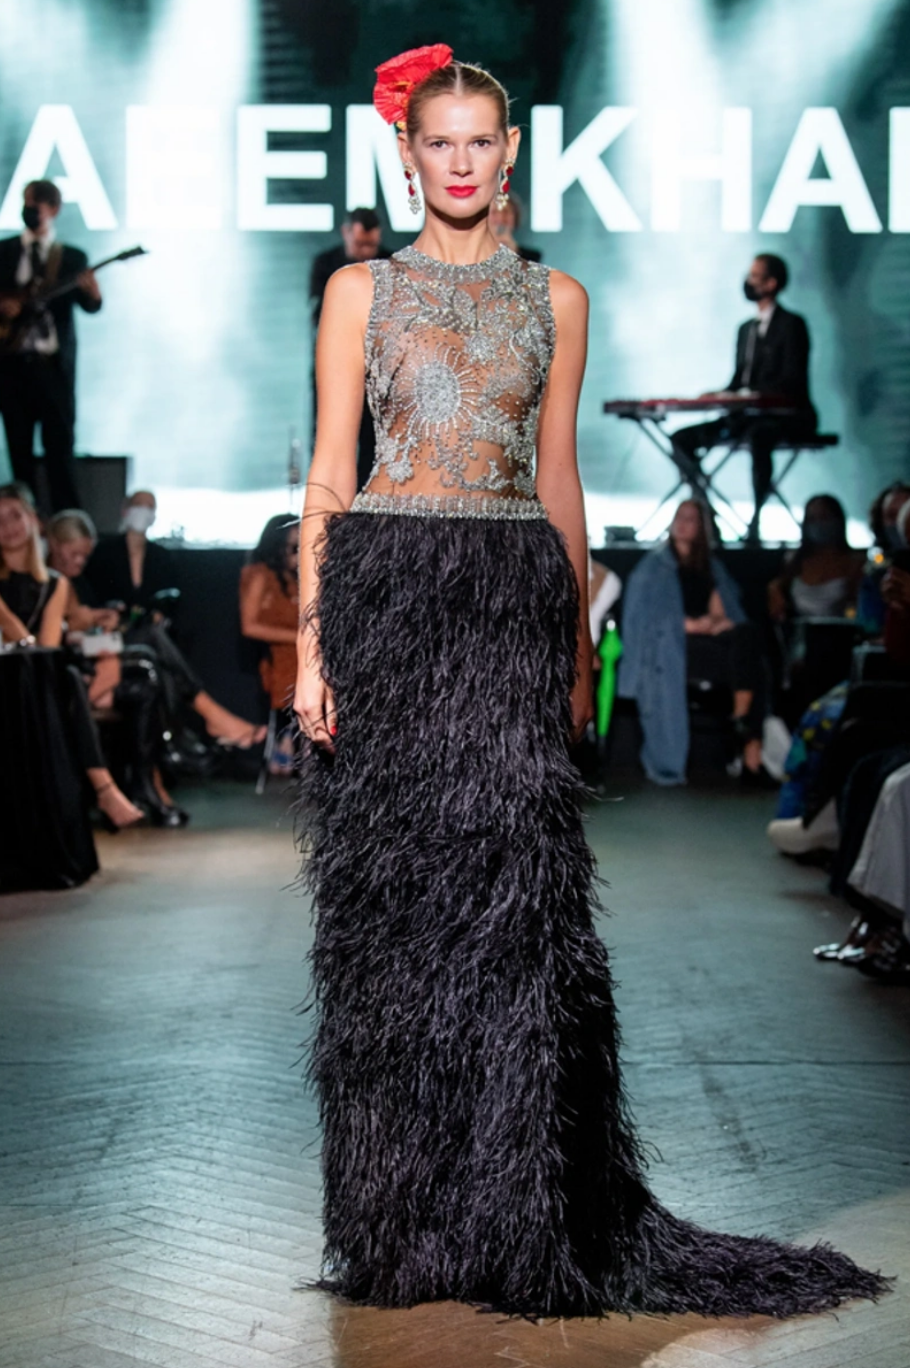 Ubah Hassan's Crystal Embellished Feather Dress